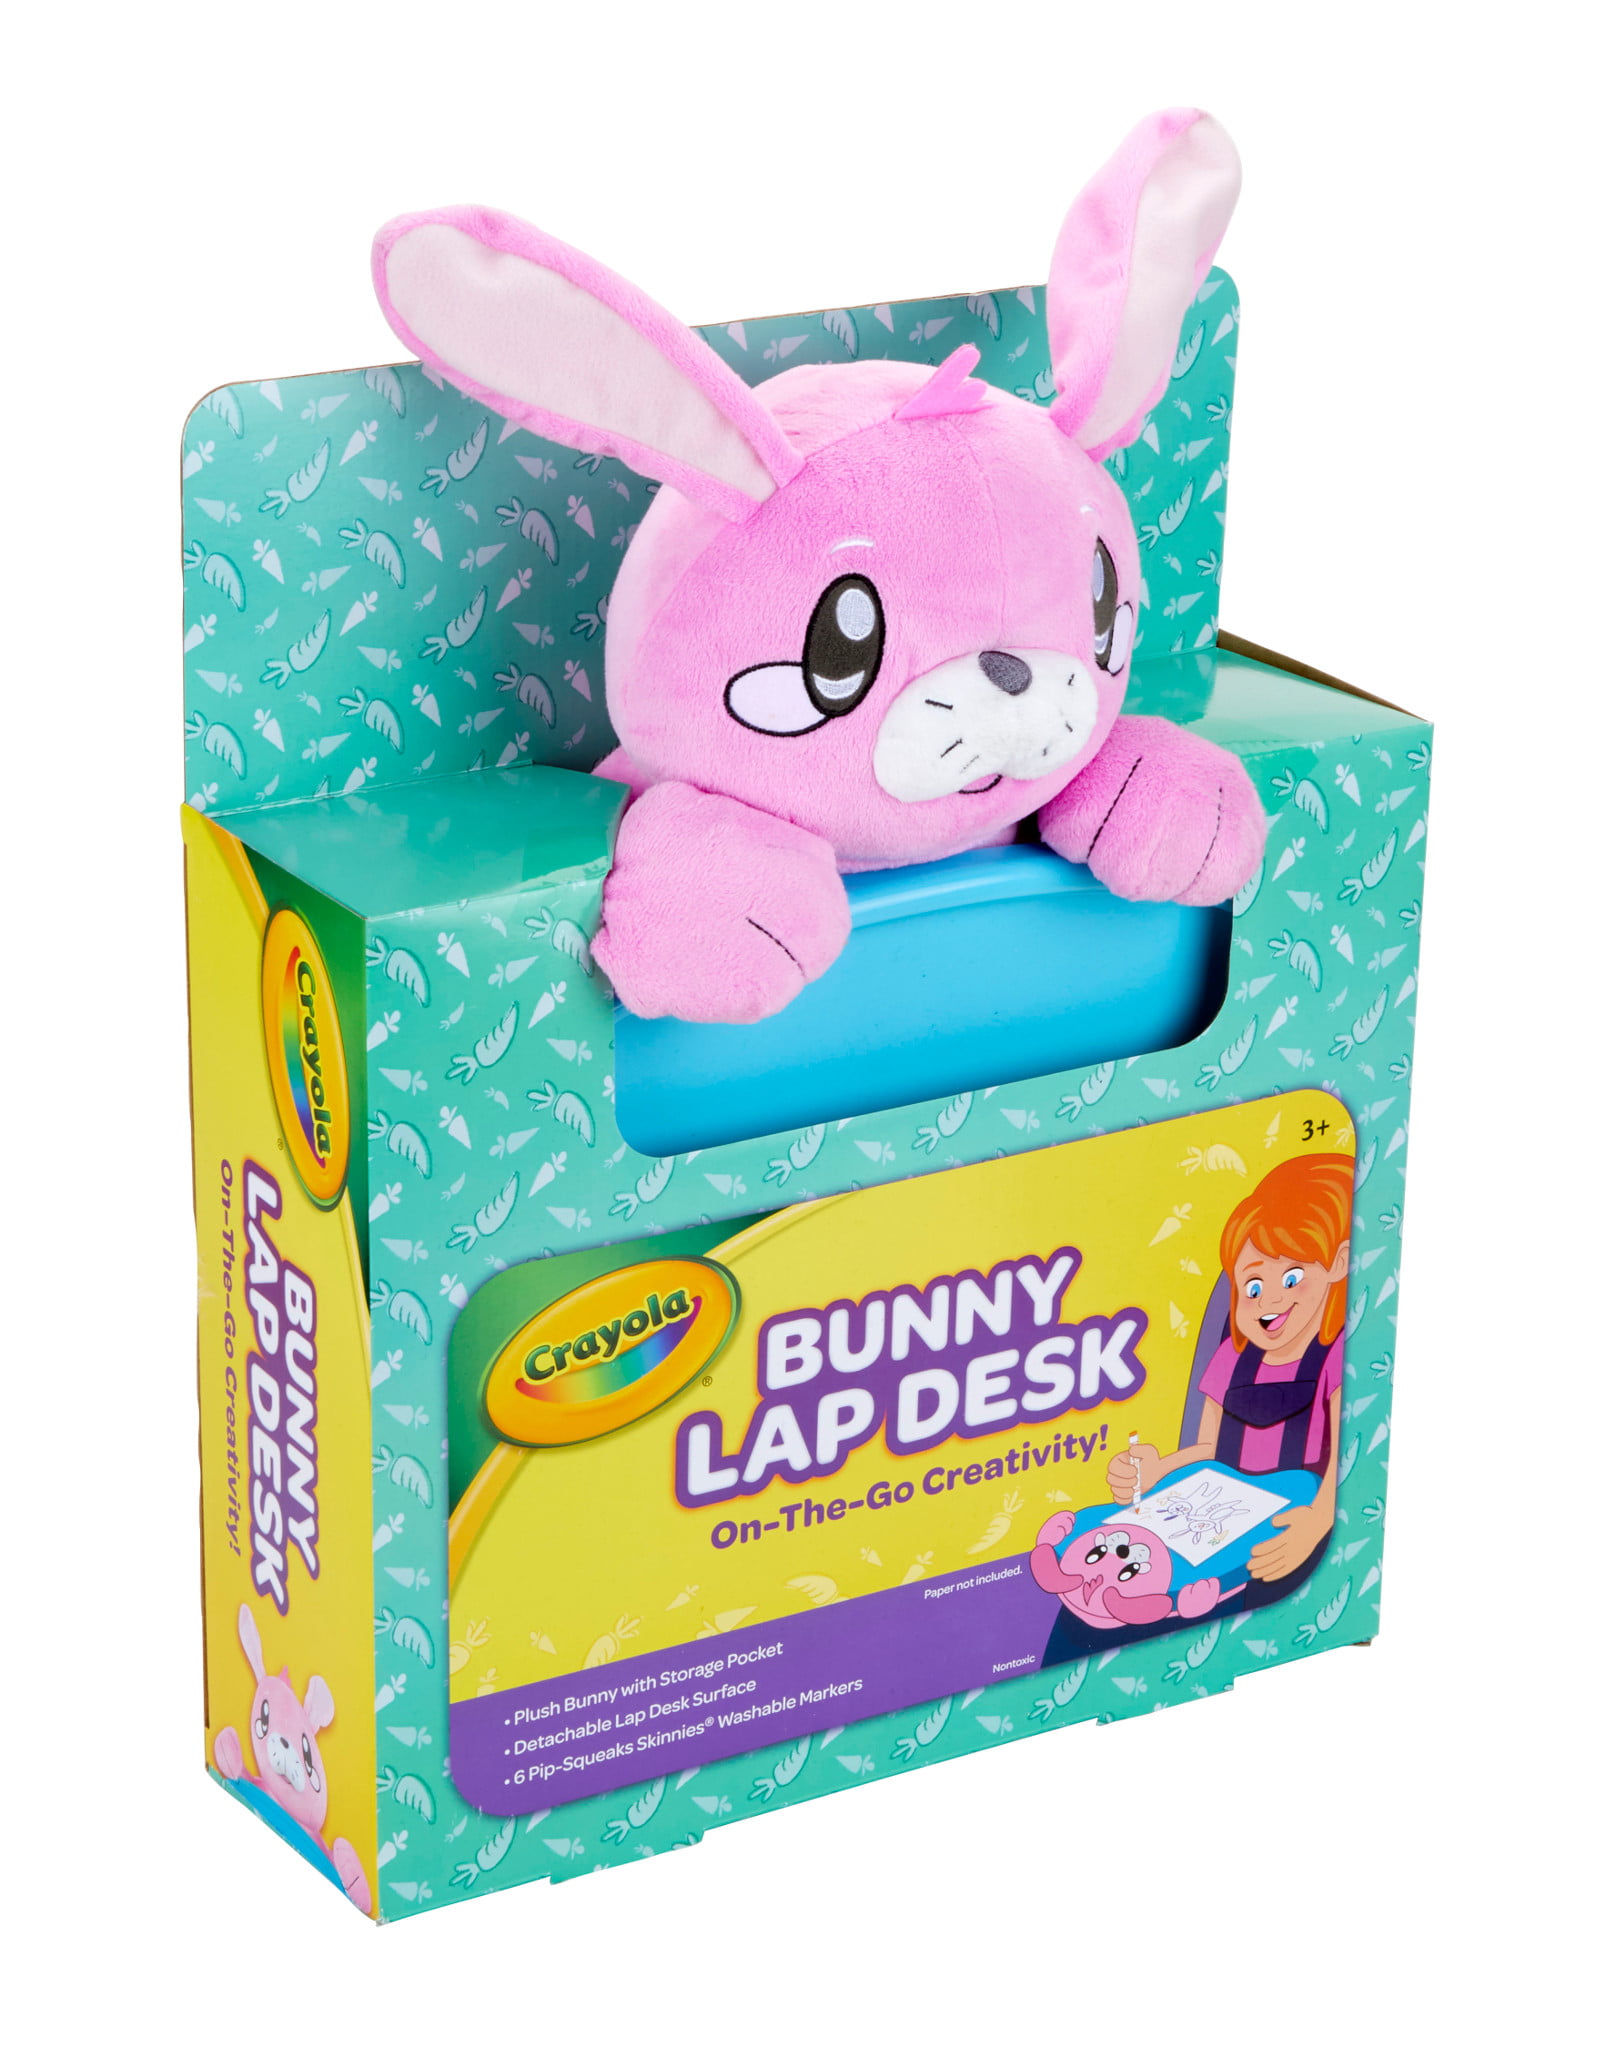 Crayola Bunny Plush Travel Lap Desk With Markers Ages 4